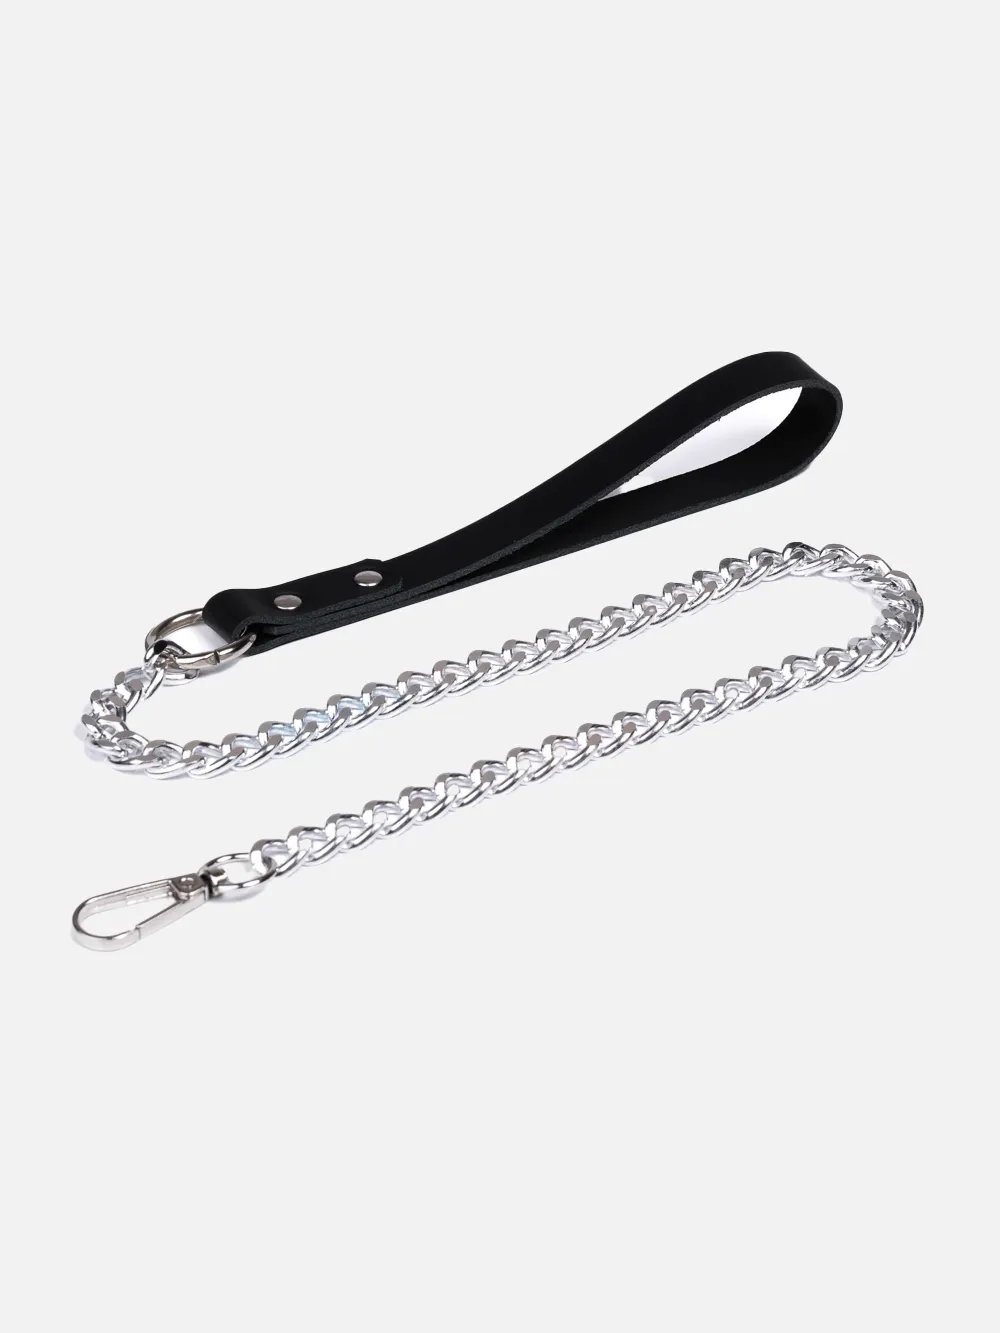 Erotic leather leash with chain and carabiner for tying and fastening. Accessories for adults.